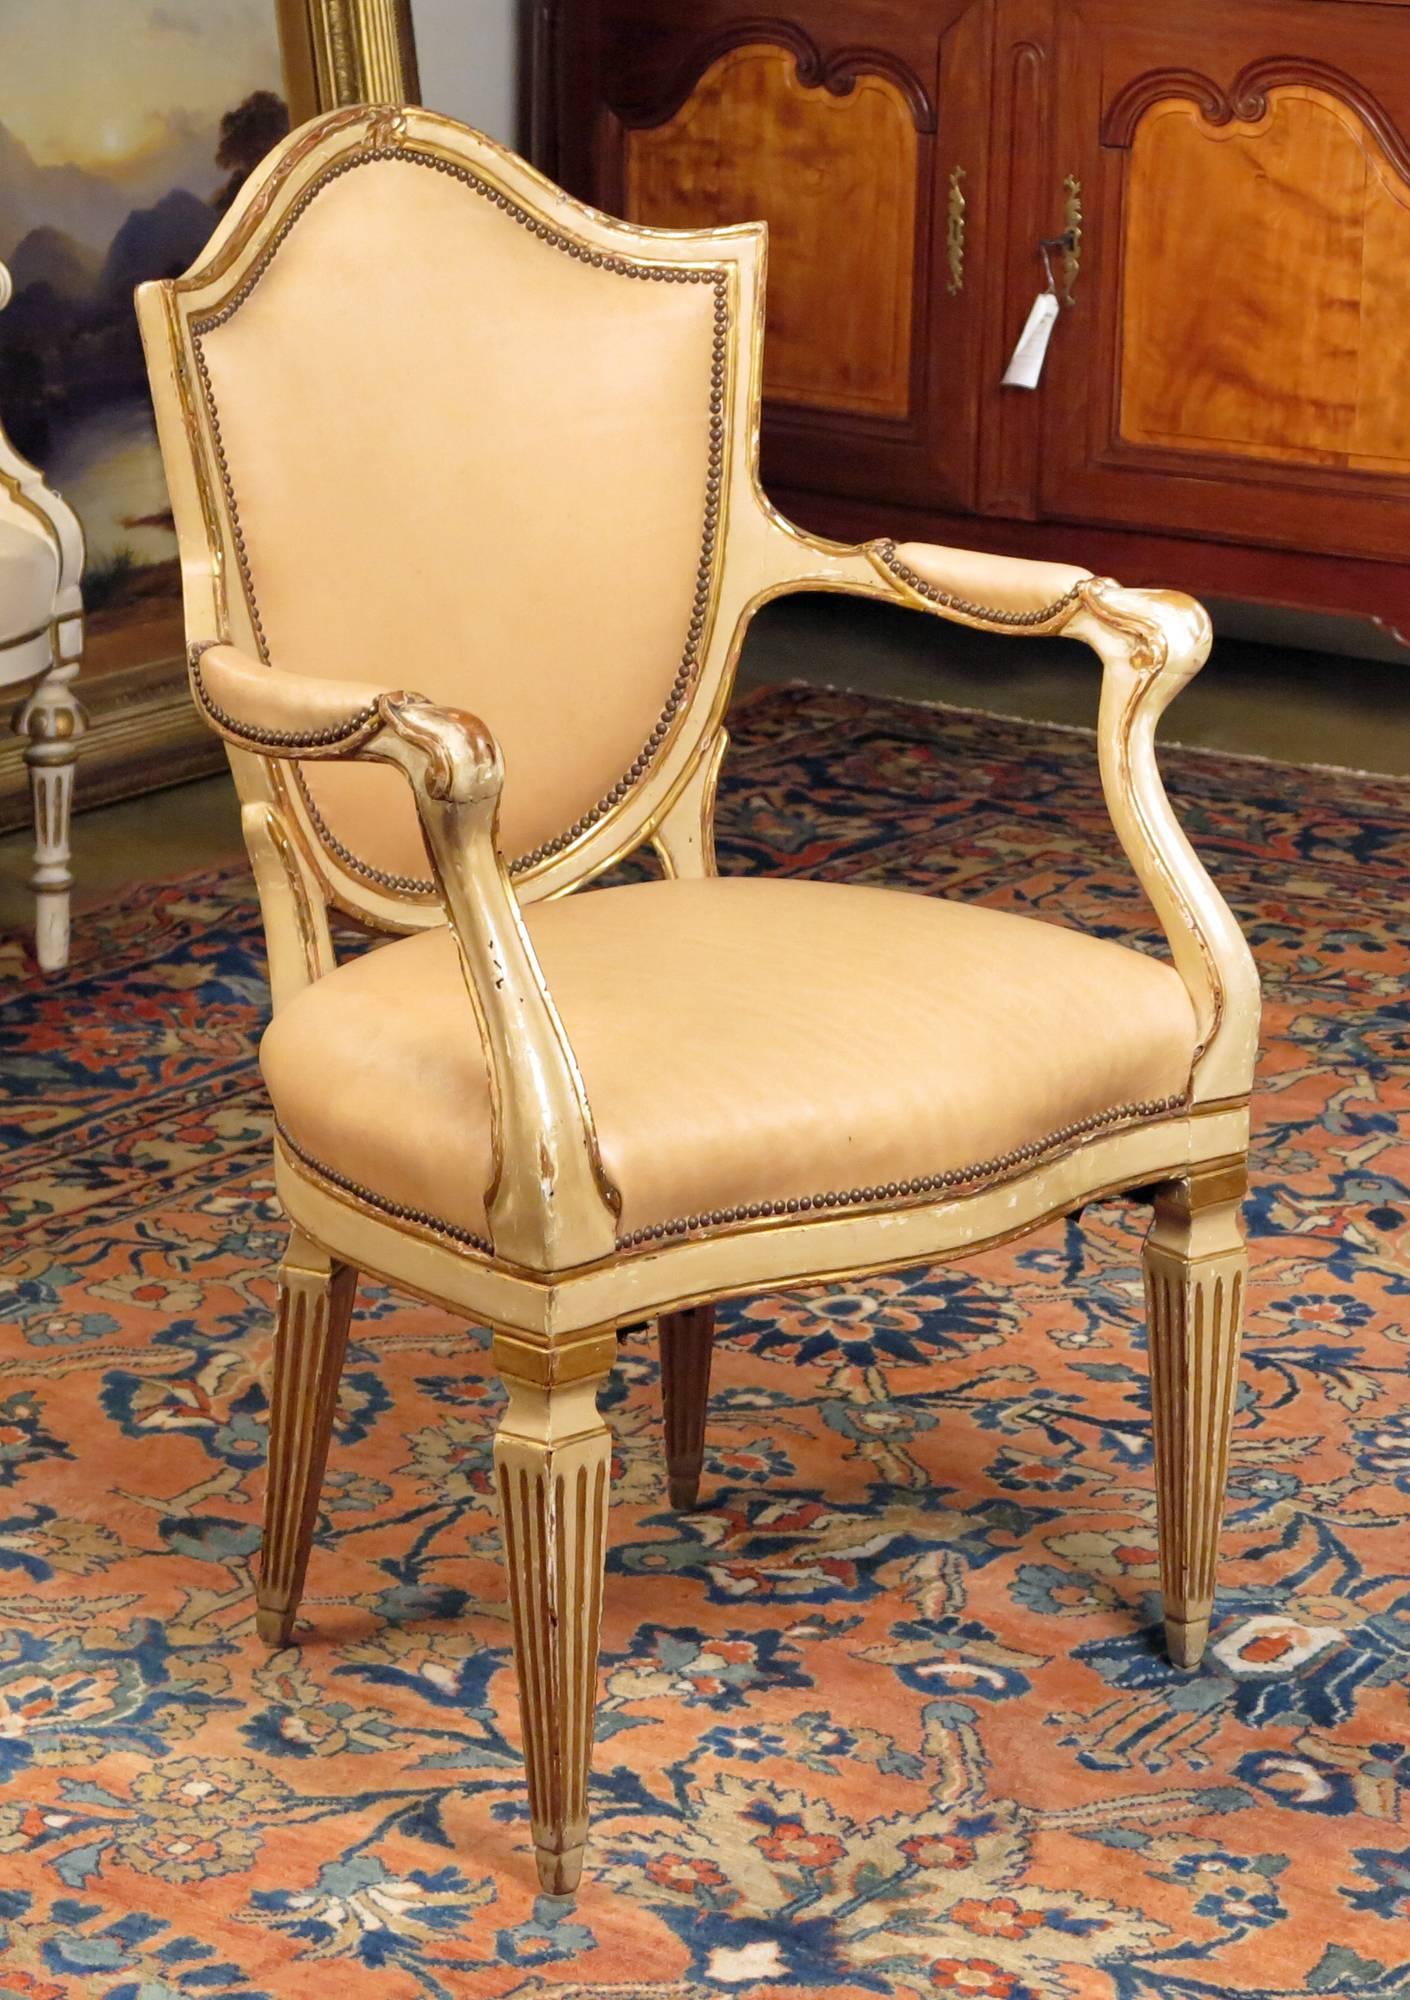 A Set of Four North Italian Neoclassic
Cream Painted & Parcel Gilt Armchairs
Late 18th Century

Upholstered in cream leather

Height 39 in.  Width 24 in.  Depth 19 in.

Provenance:
Property of a West Coast Collector
Le Trianon Fine Art &